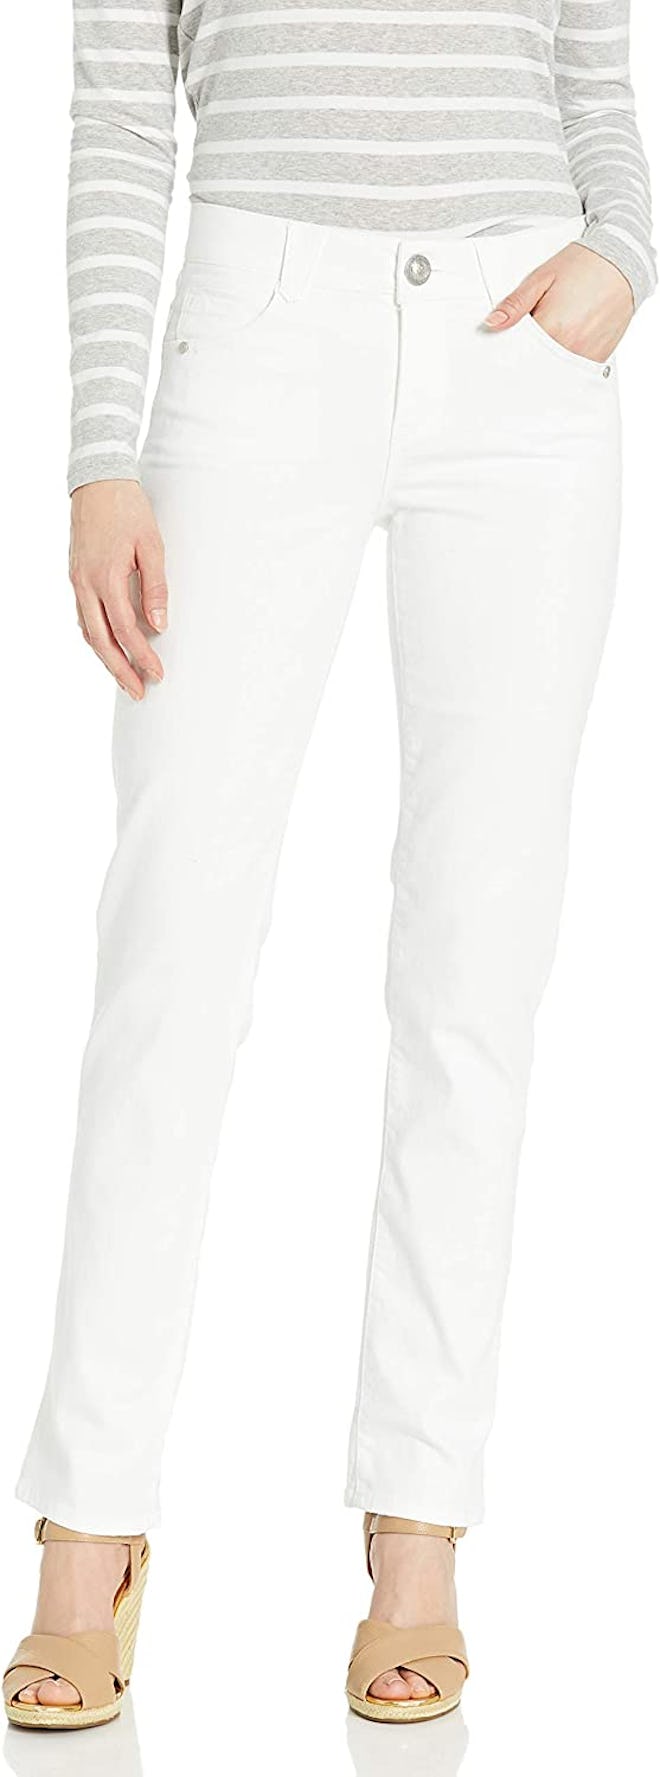 Best White Mid-Rise Jeans